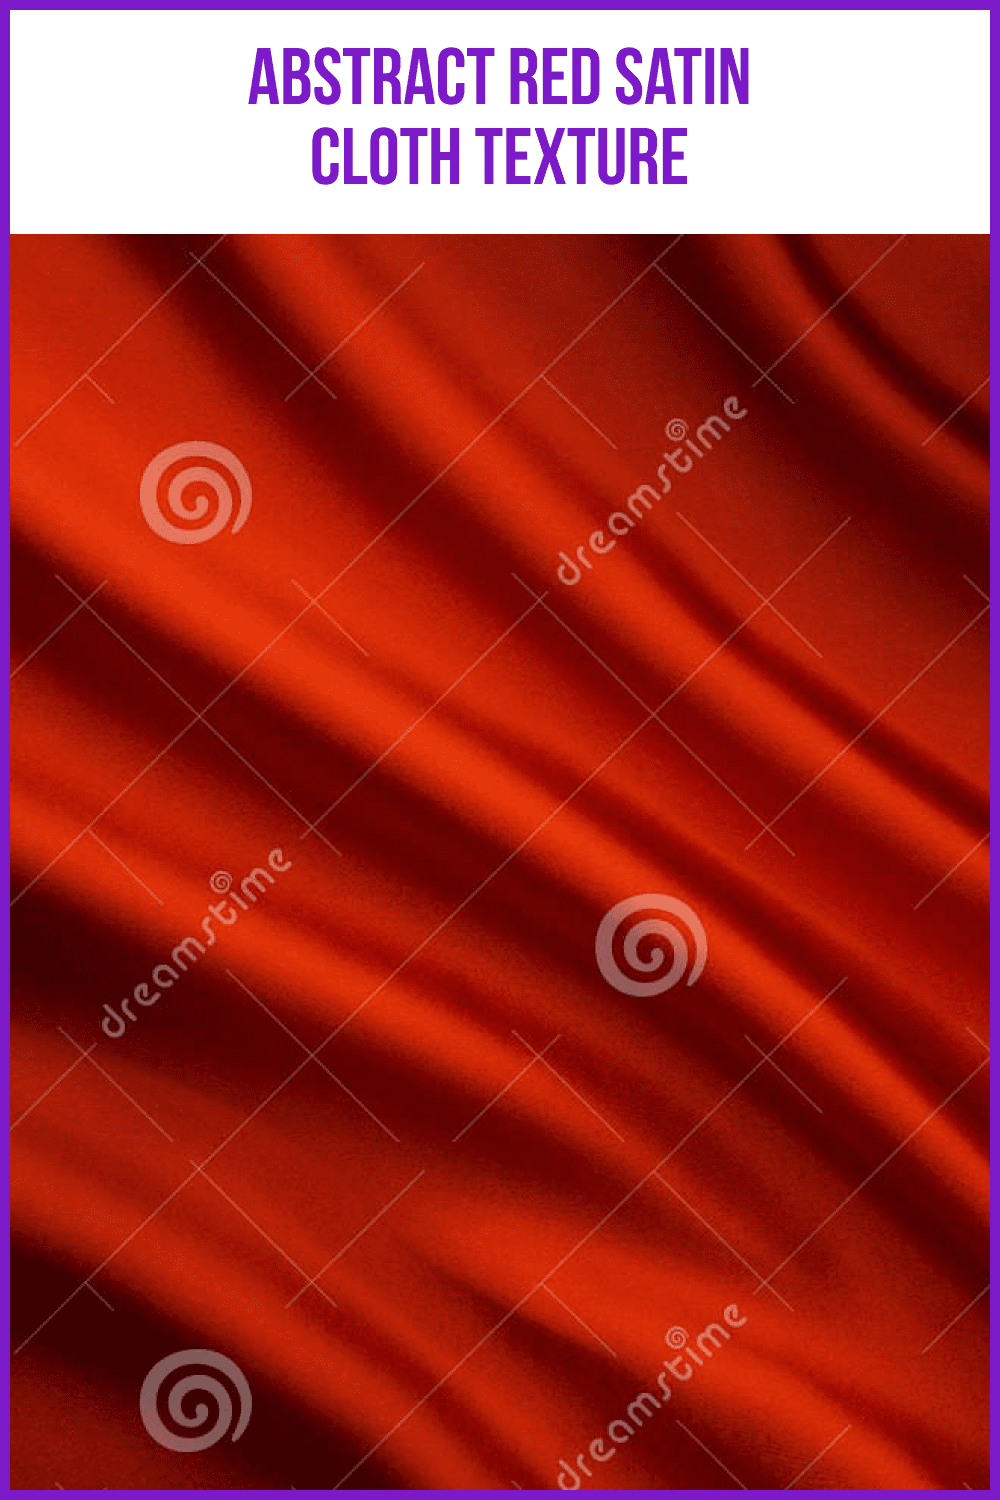 Abstract Red Satin Cloth Texture.